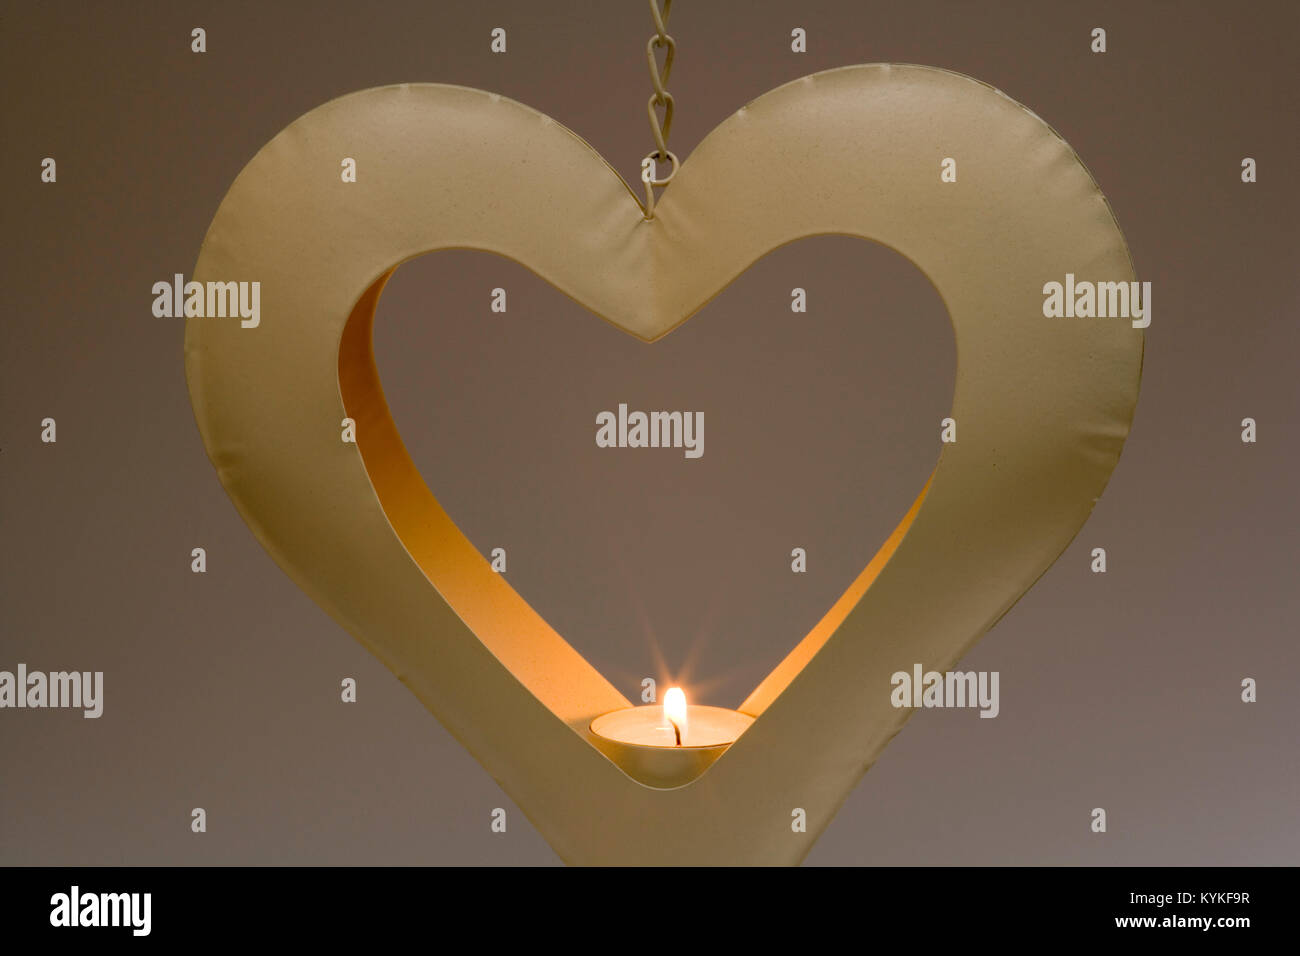 Burning tealight candle in a heart shaped metal candle holder hanging in  front of a graduated plain background Stock Photo - Alamy